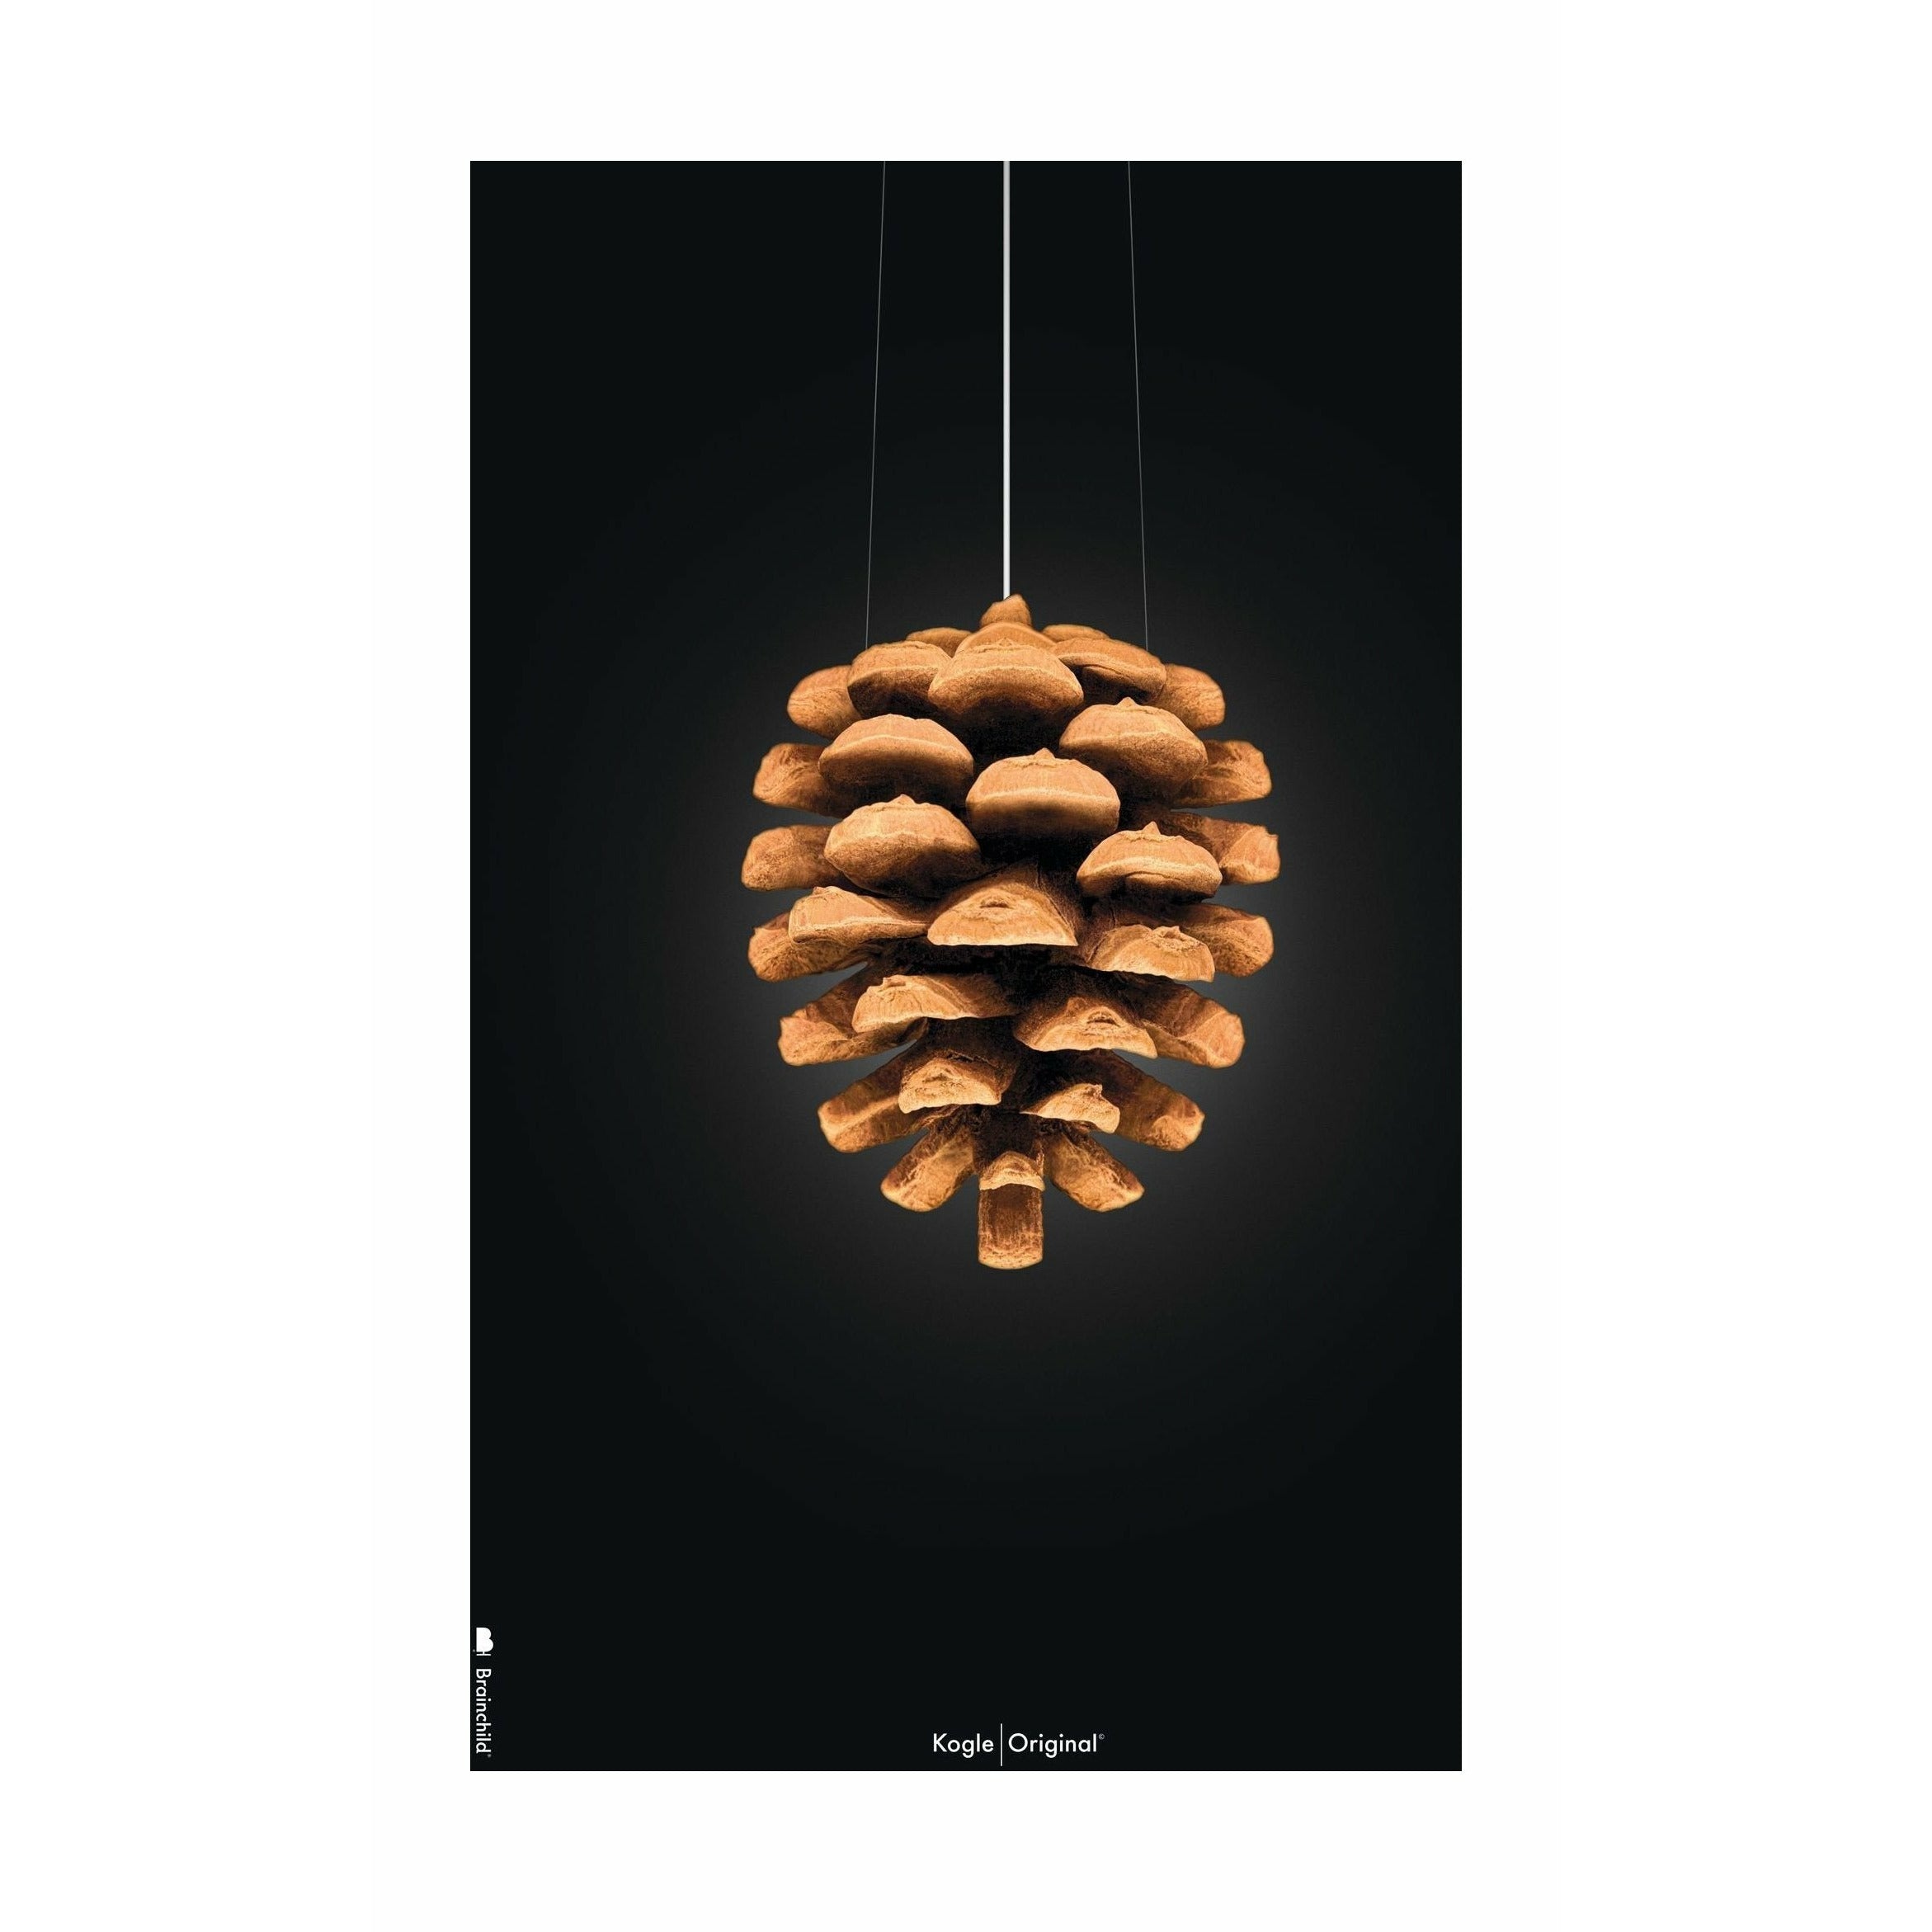 Brainchild Pine Cone Classic Poster Without Frame 30x40 Cm, Black Background